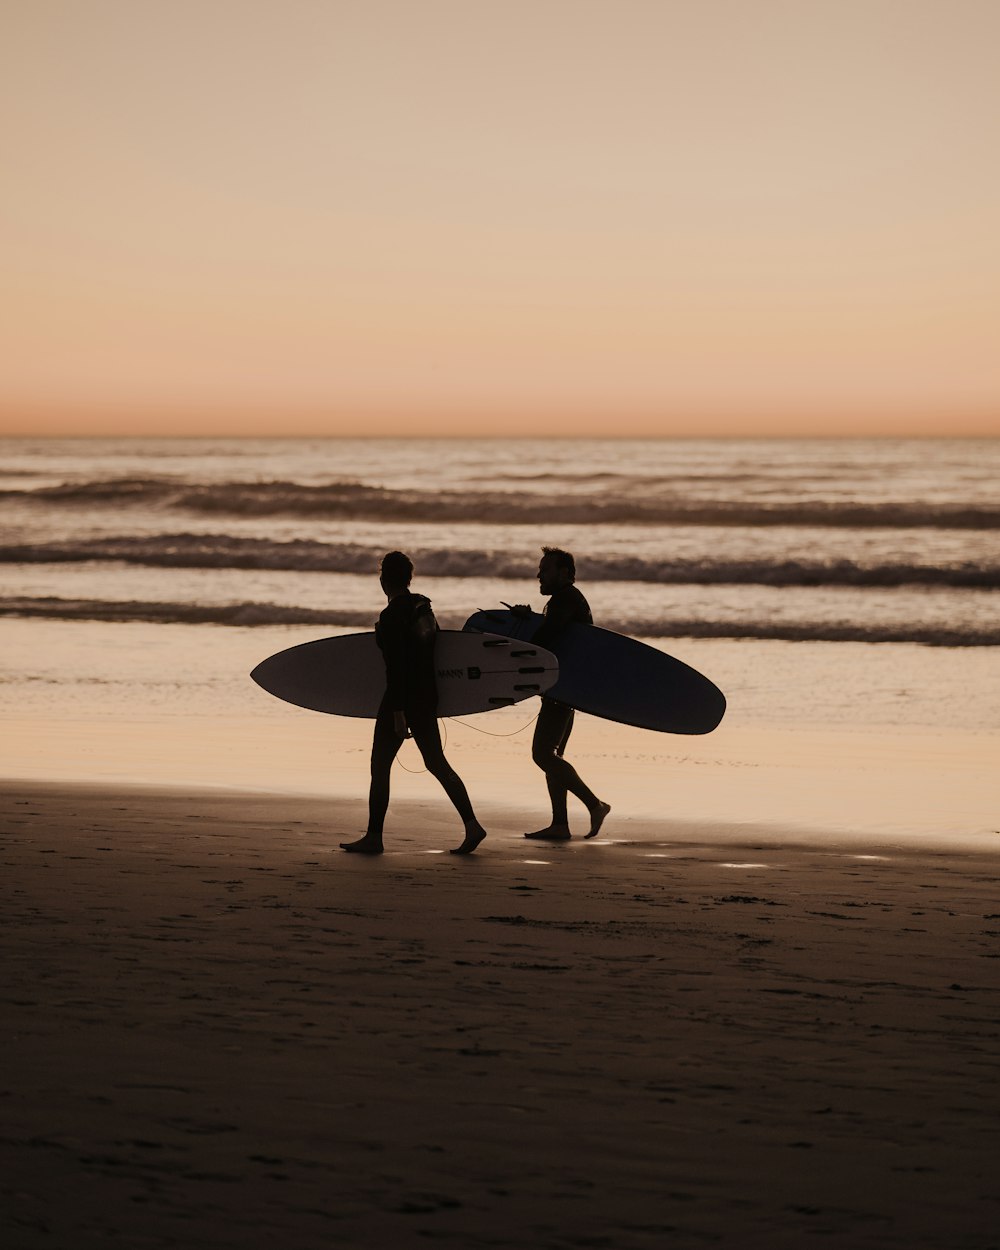 two people walking on a beach with a surfboard